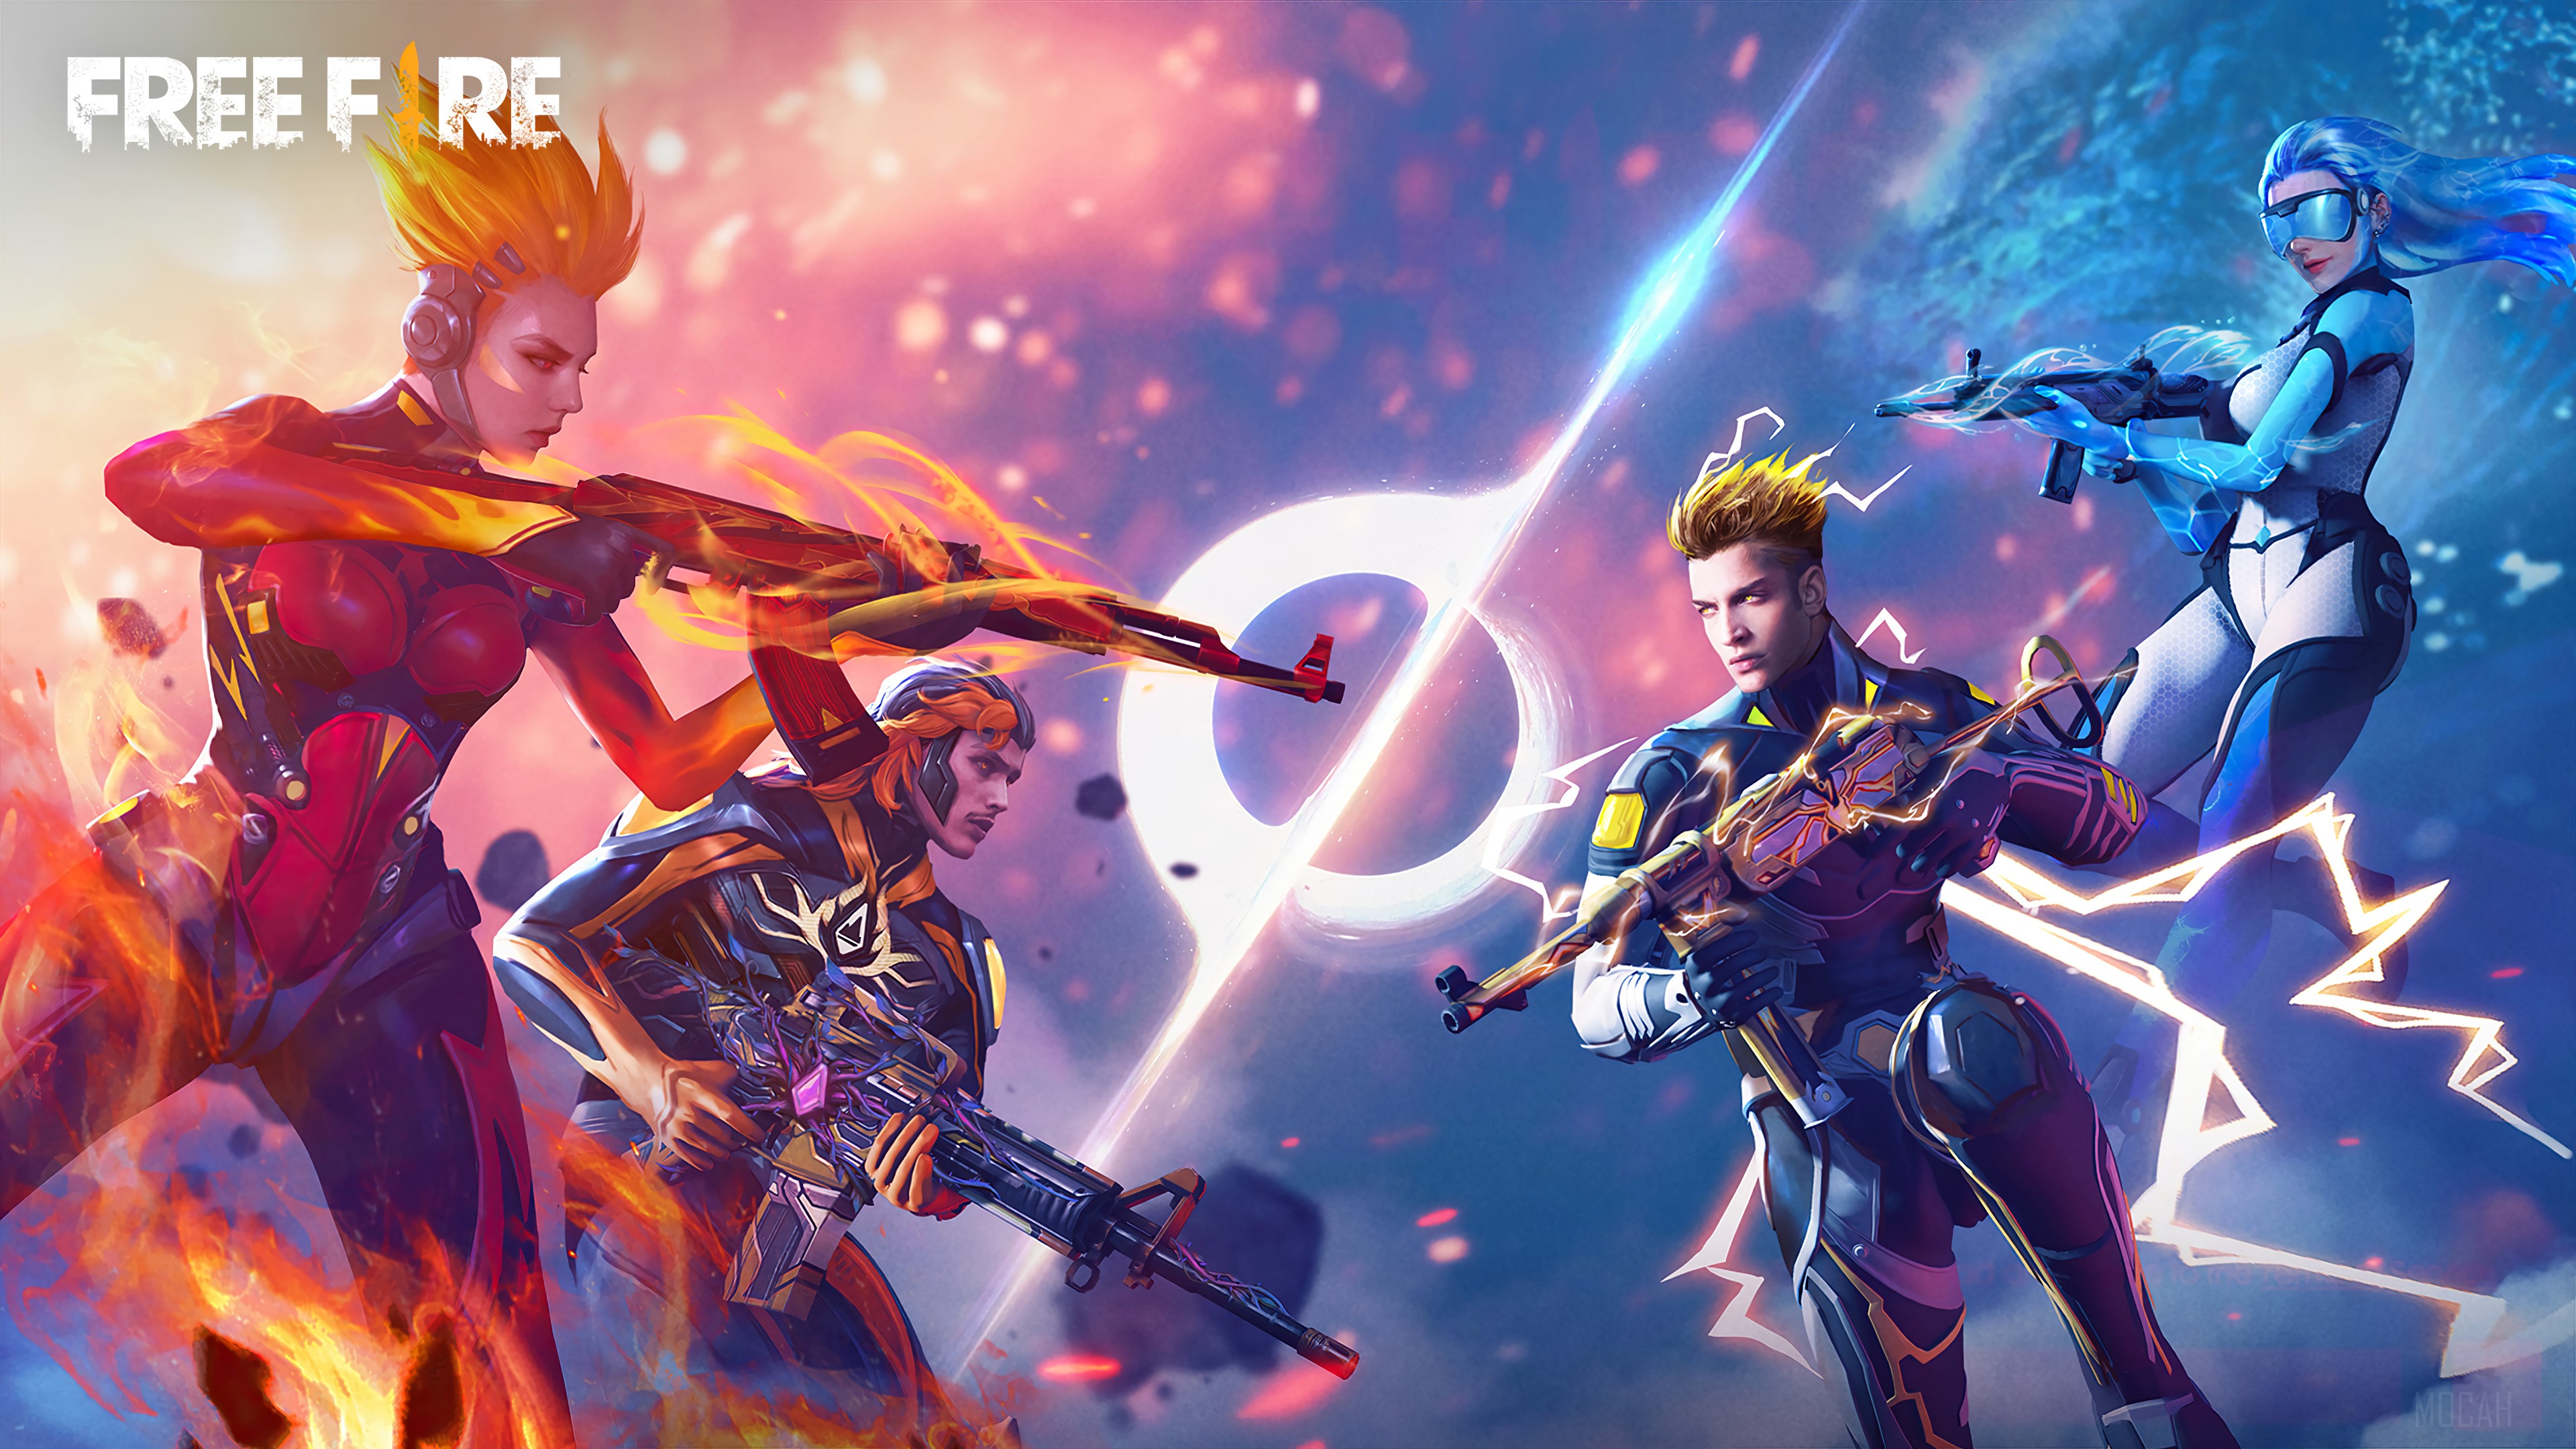 Wukong Free Fire Wallpapers